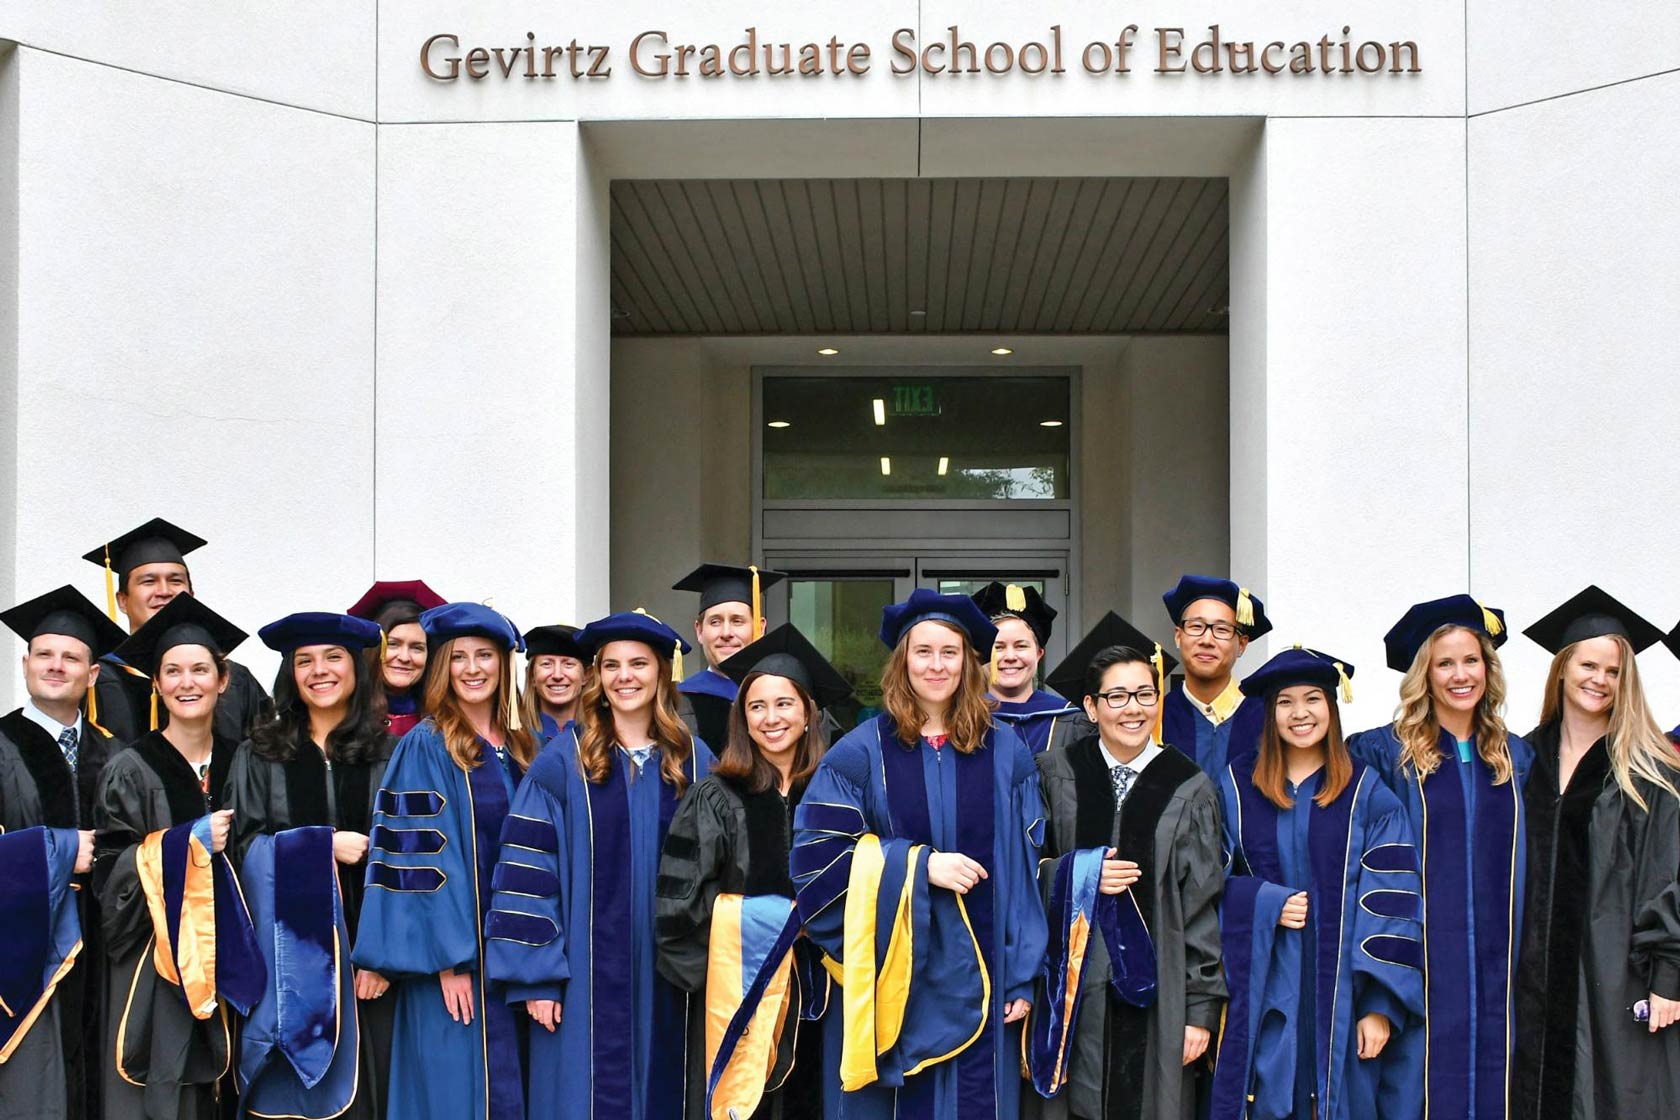 GGSE graduates in regalia stand in front of the GGSE building after graduation.